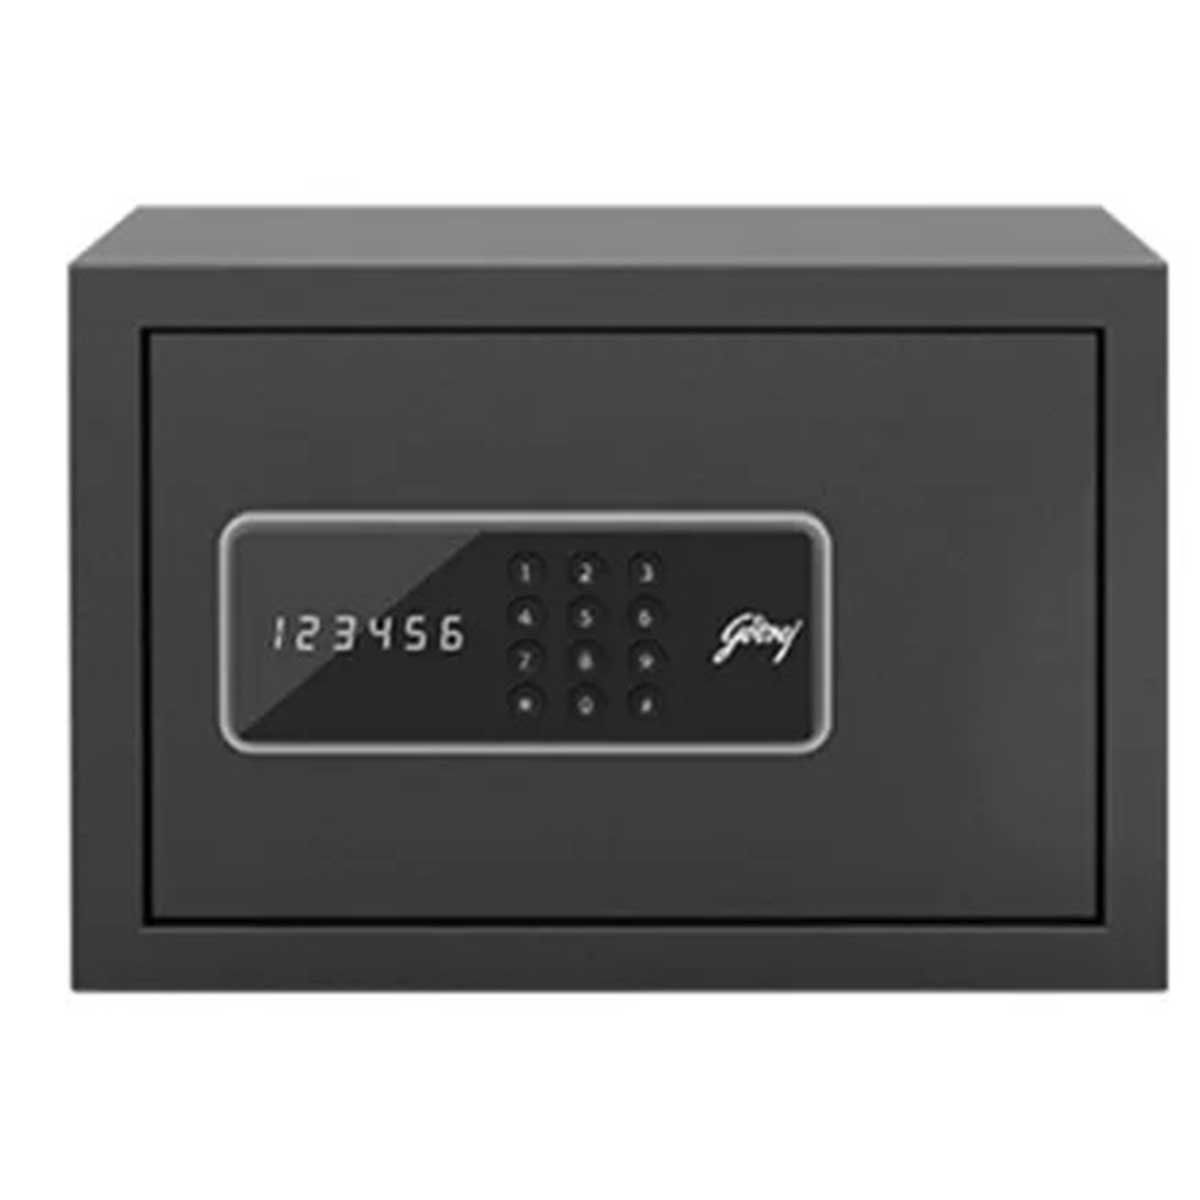 Security Safes Manufacturers, Suppliers in Mg Road